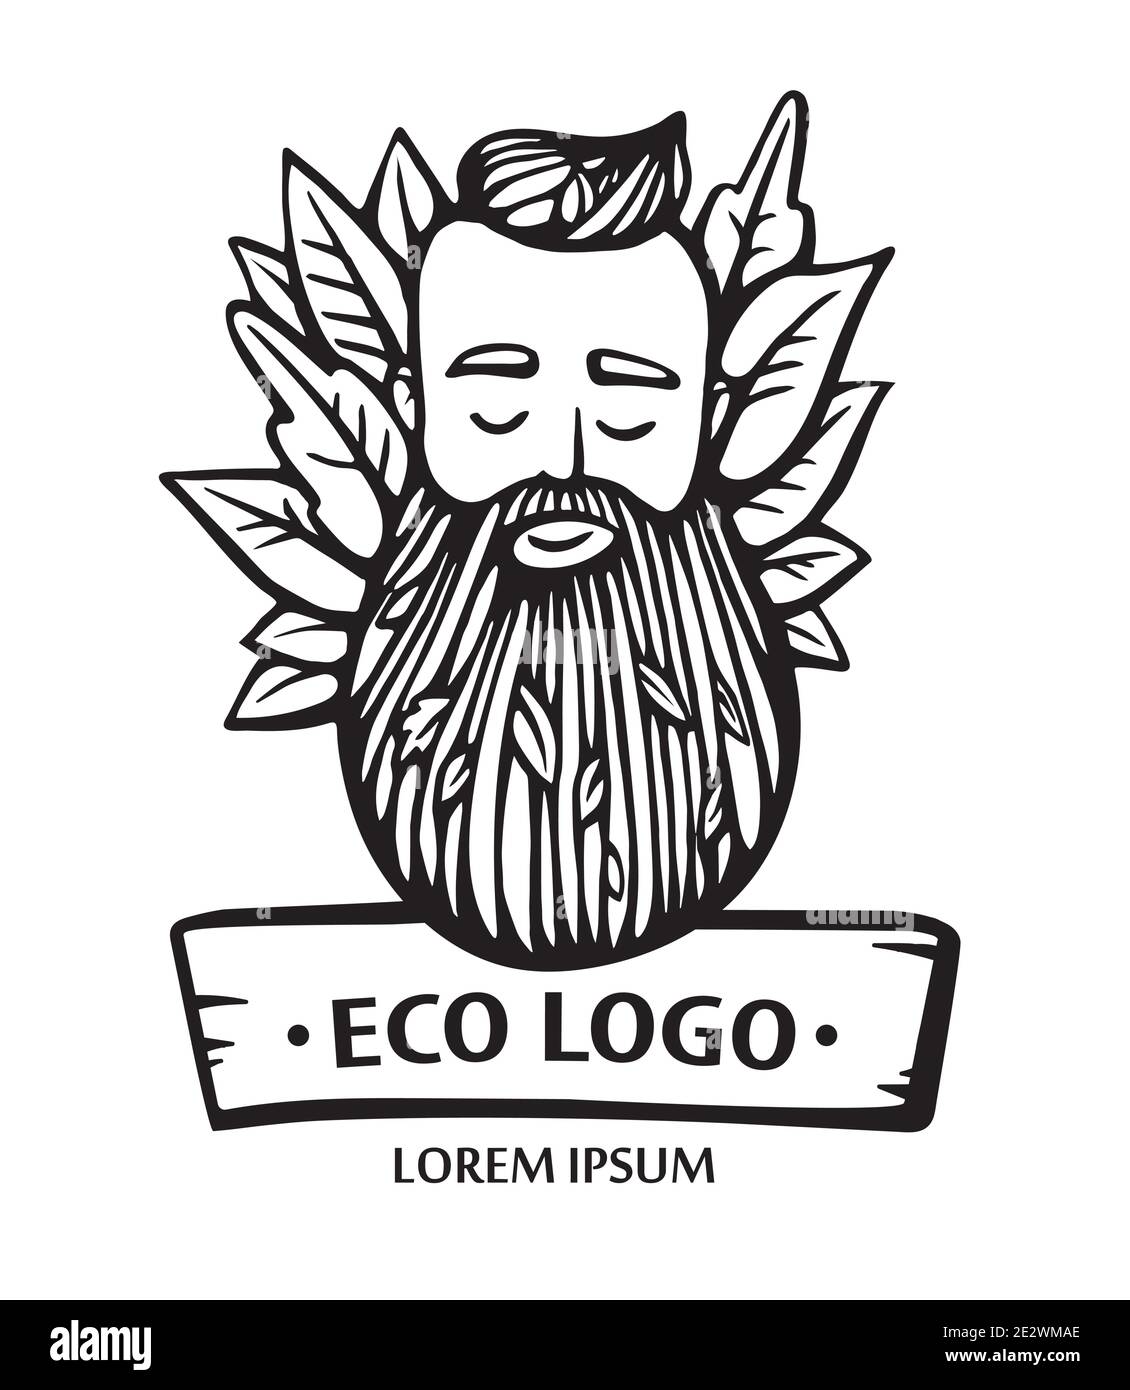 Eco nature logo. Hipster head with blooming beard with leafs. Hand